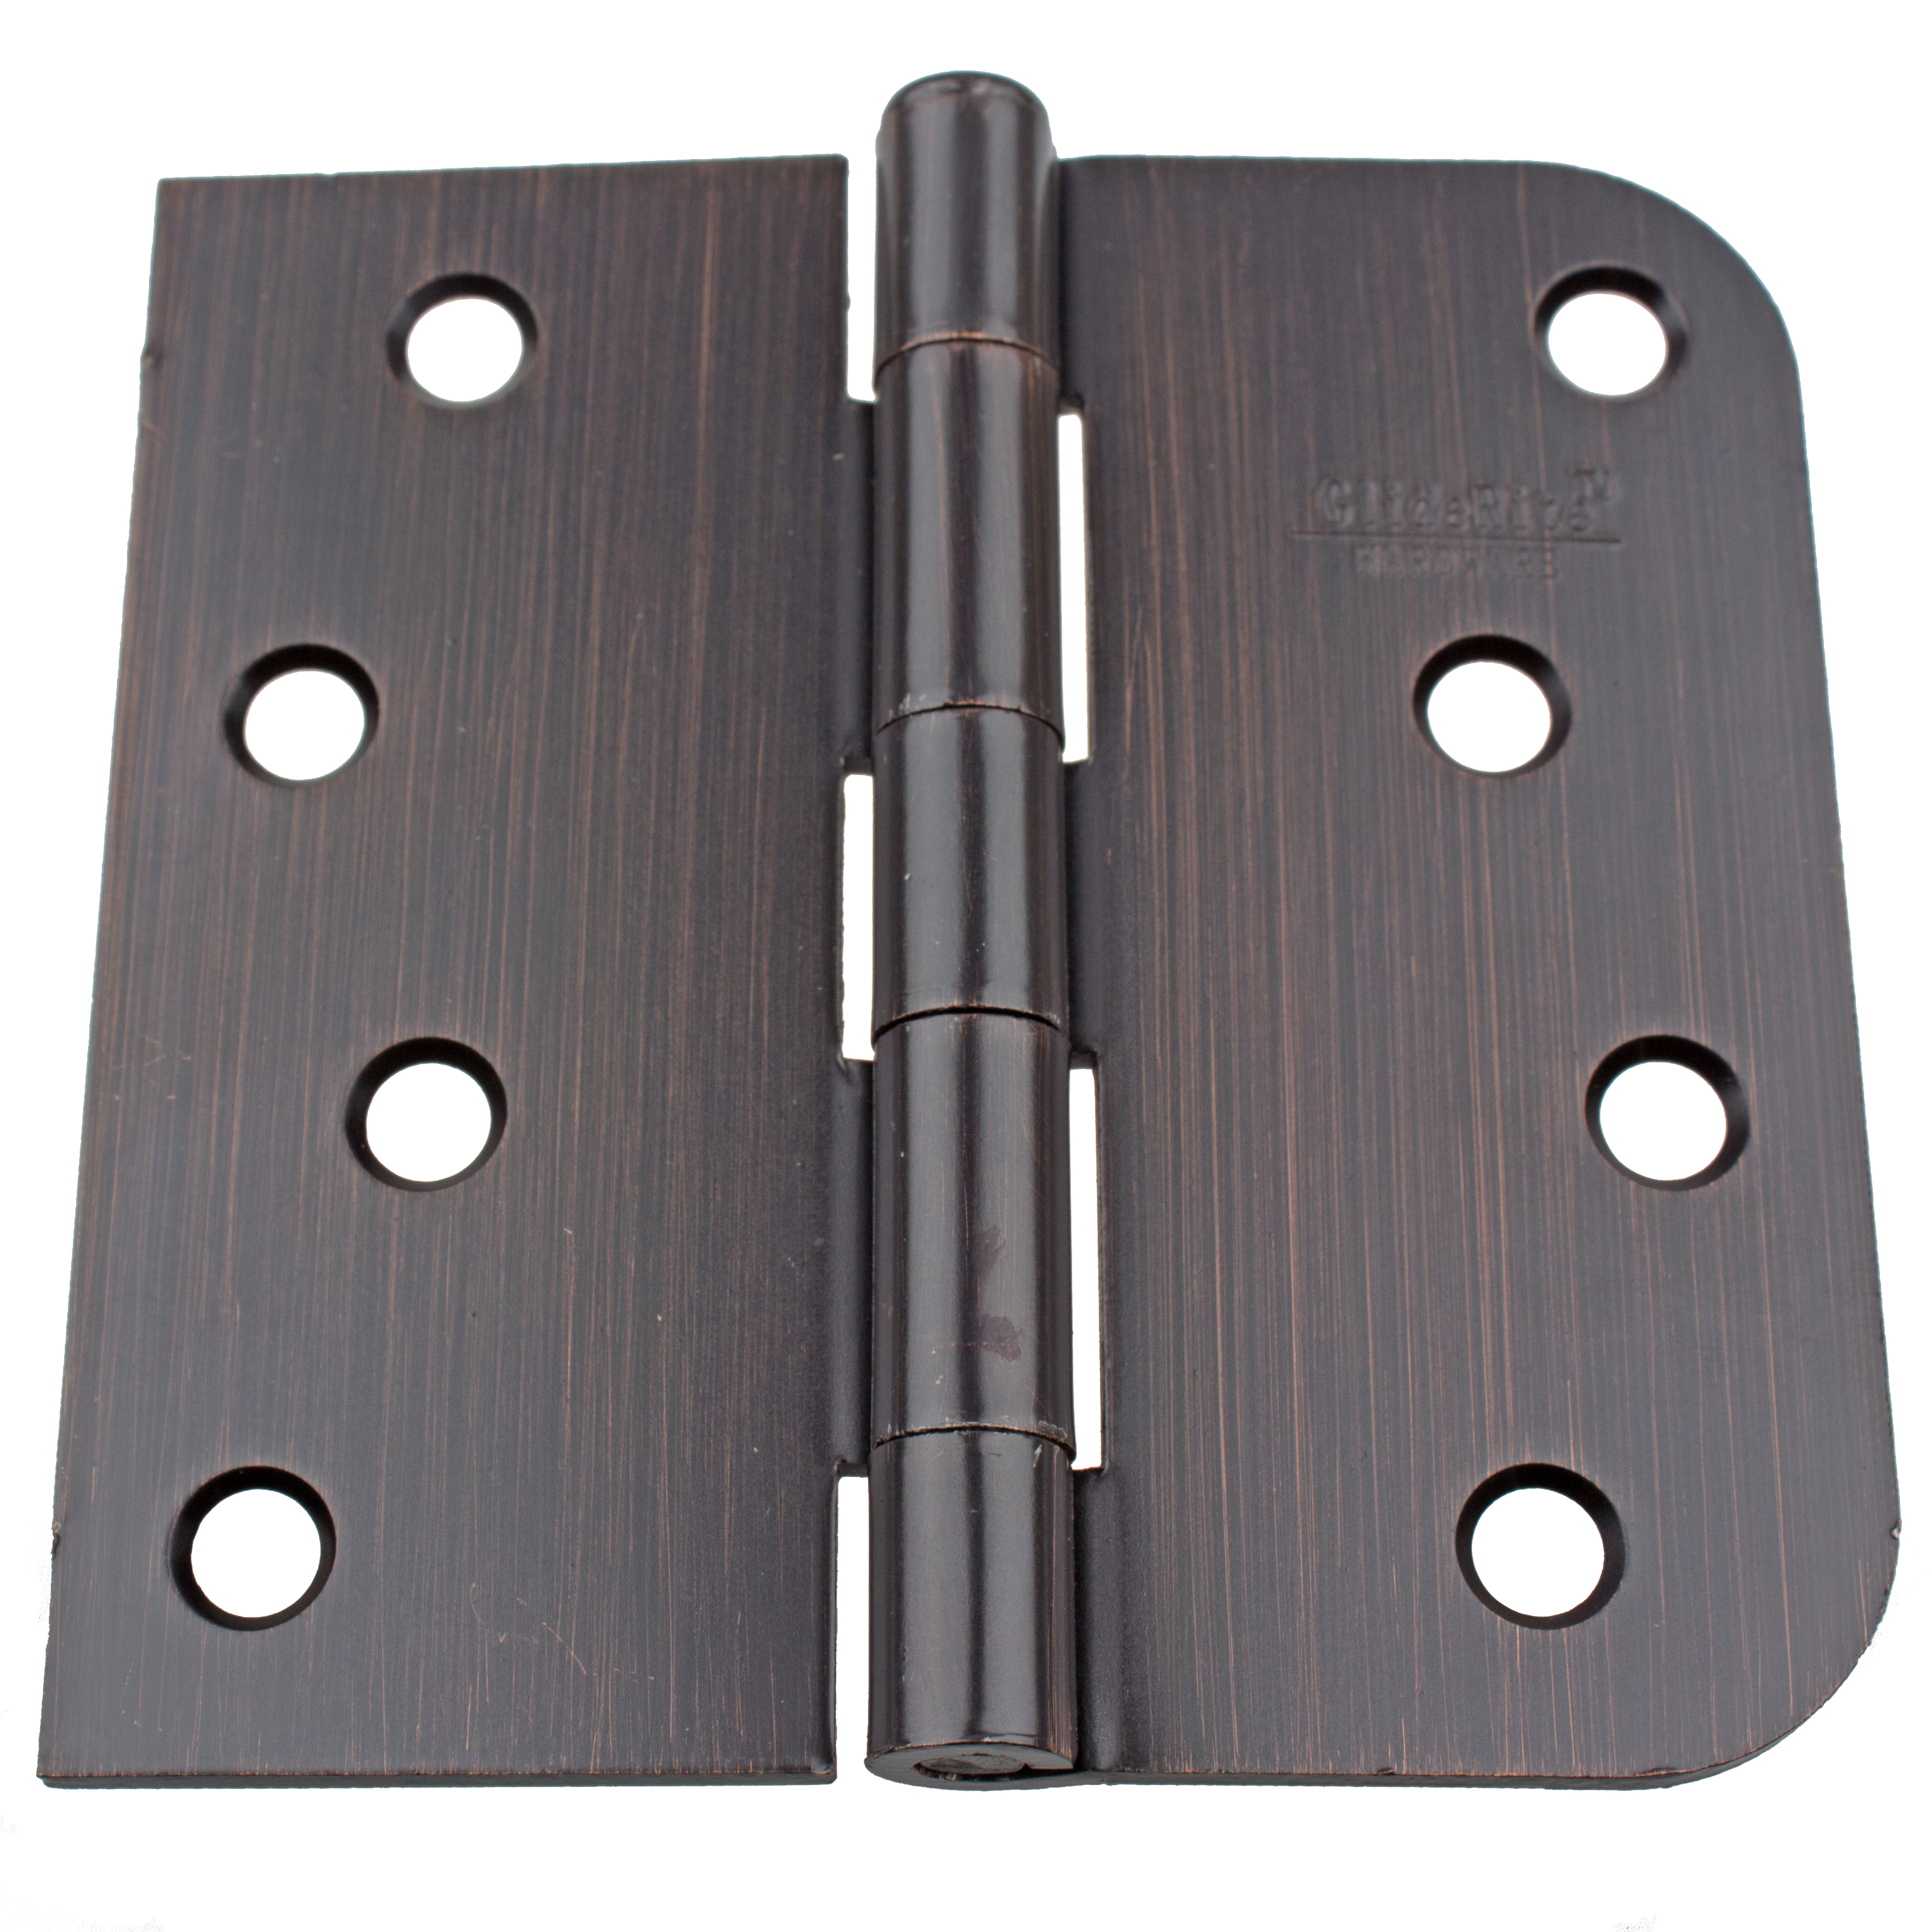 GlideRite 4 in. Steel Door Hinges with Square and 5/8 in. Corner Radius, Oil Rubbed Bronze finish, Pack of 12 - image 1 of 3